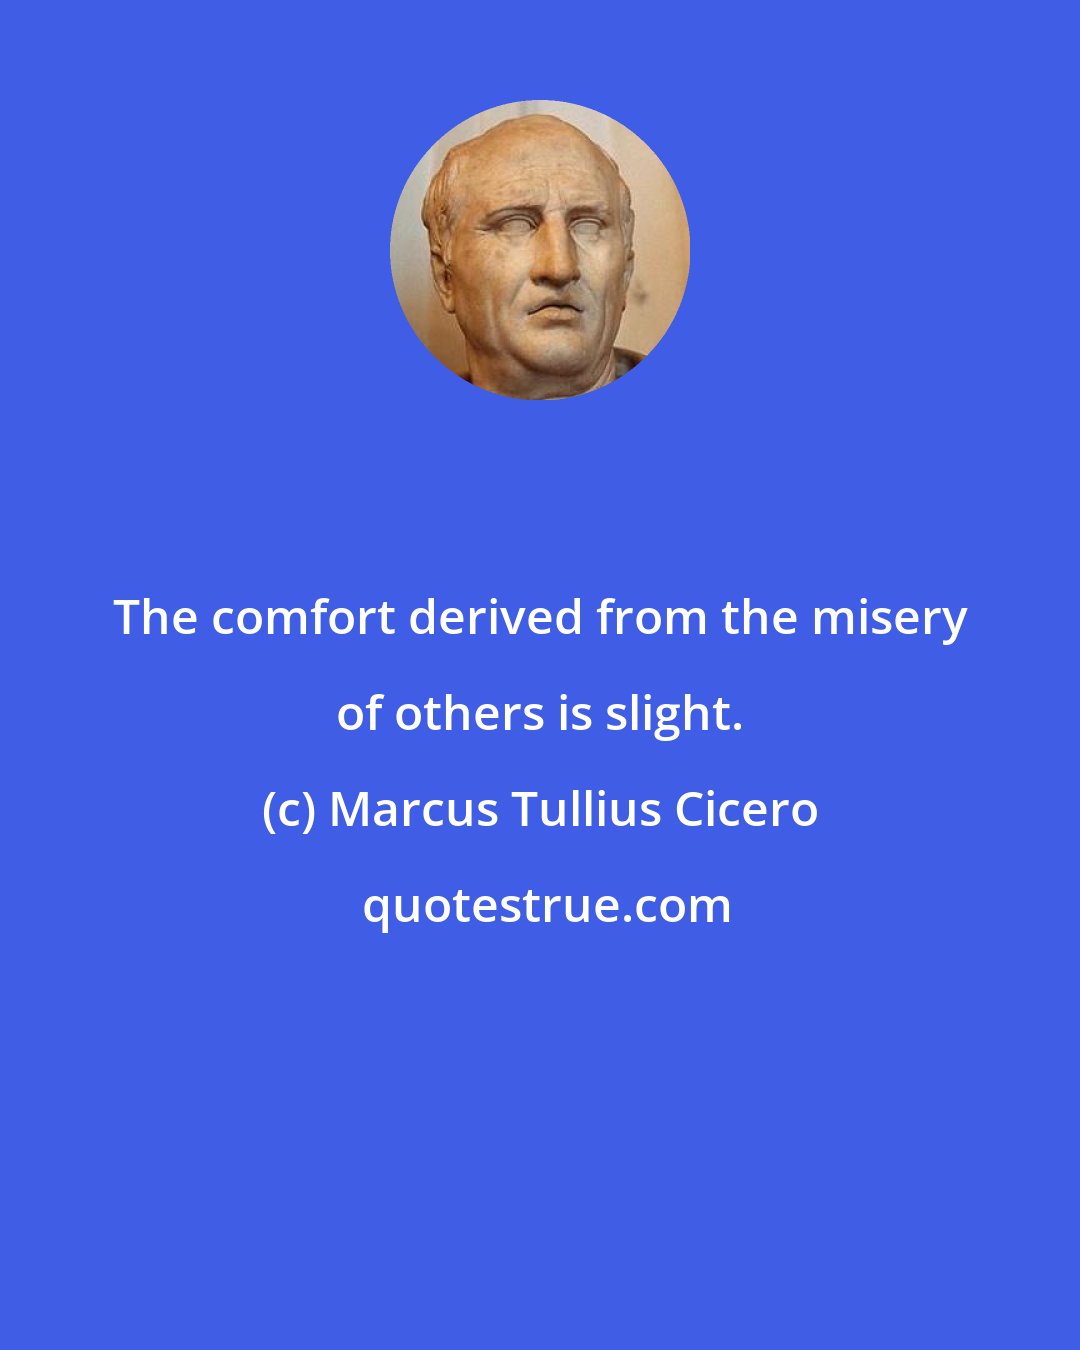 Marcus Tullius Cicero: The comfort derived from the misery of others is slight.